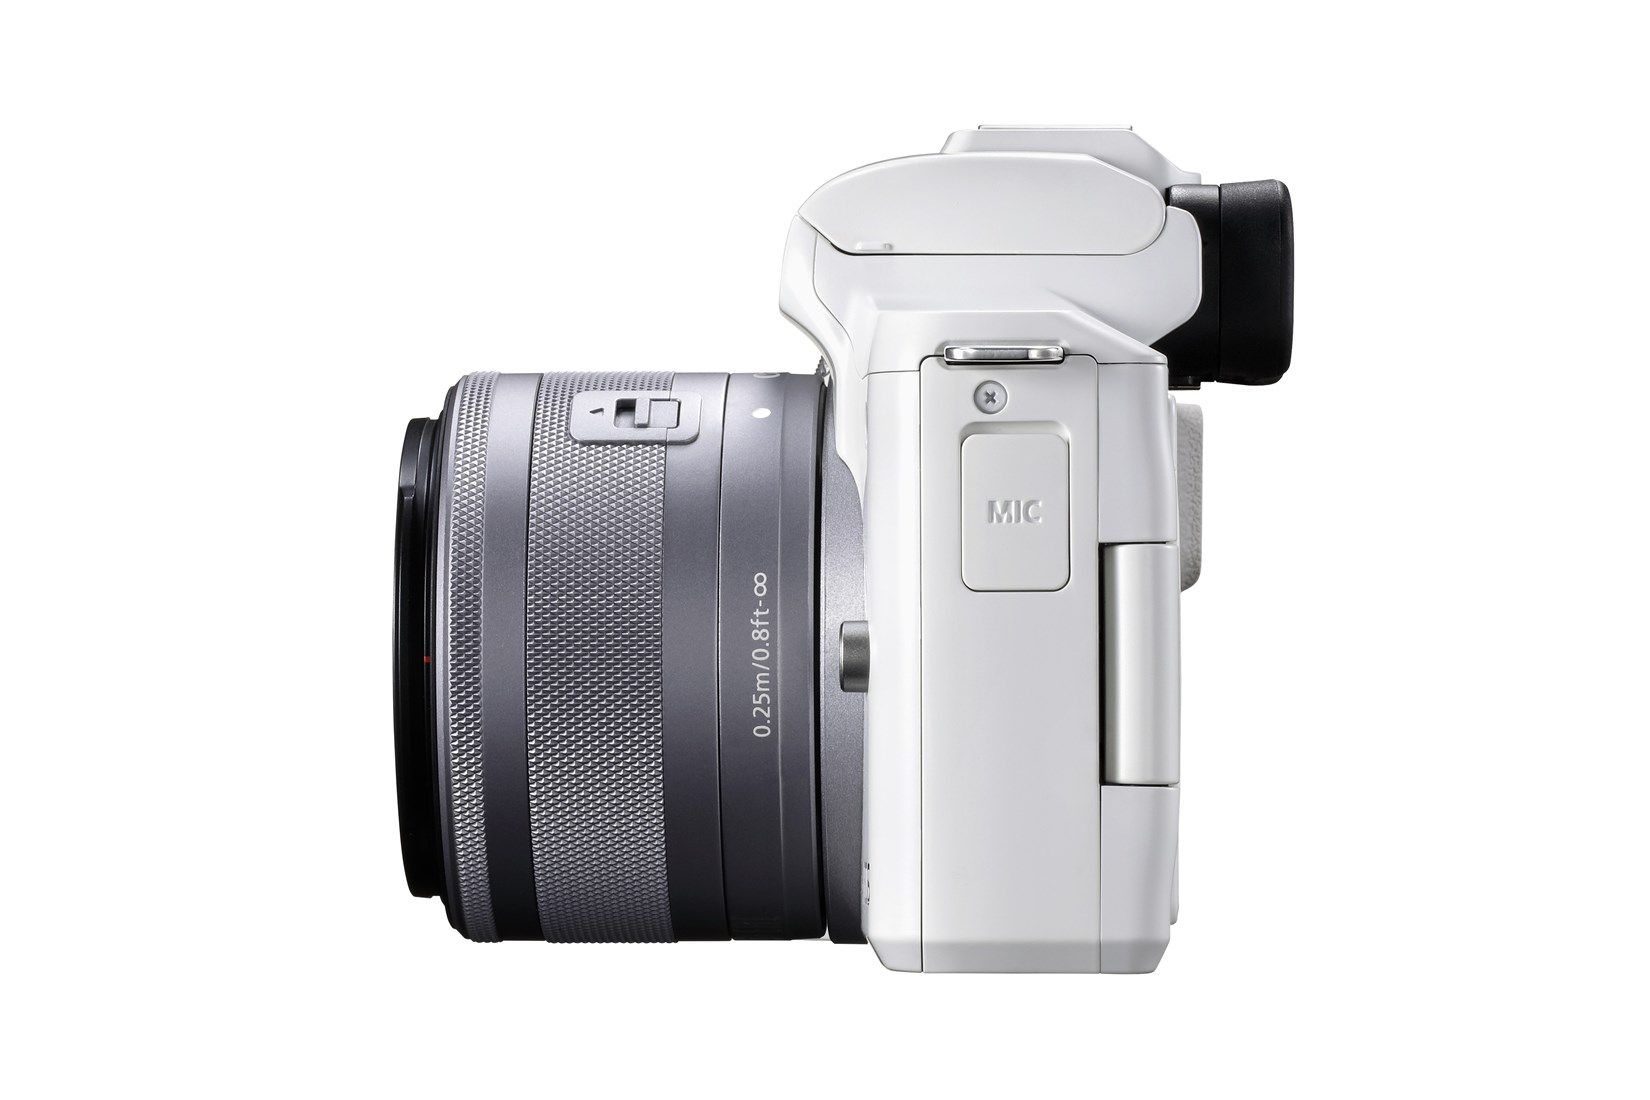 Canon EOS M50 Mark II Camera with EF-M 15-45mm Lens Kit - White - Product Photo 8 - Side profile view with the lens attached